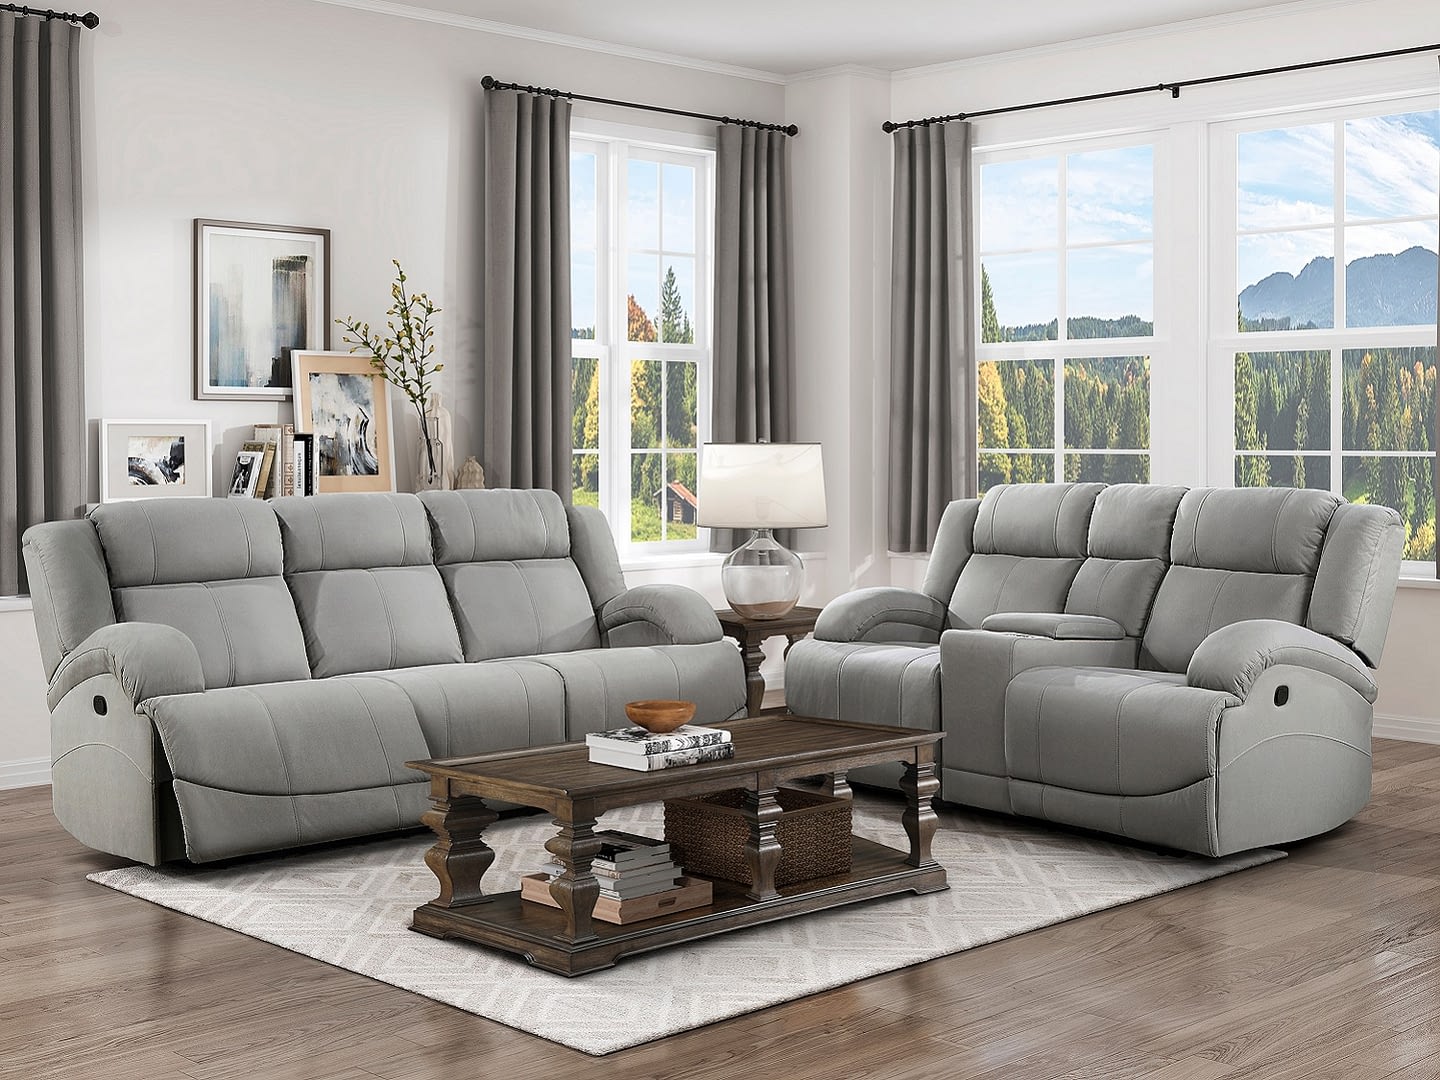 QUINCY Reclining Sofa & Loveseat with Console